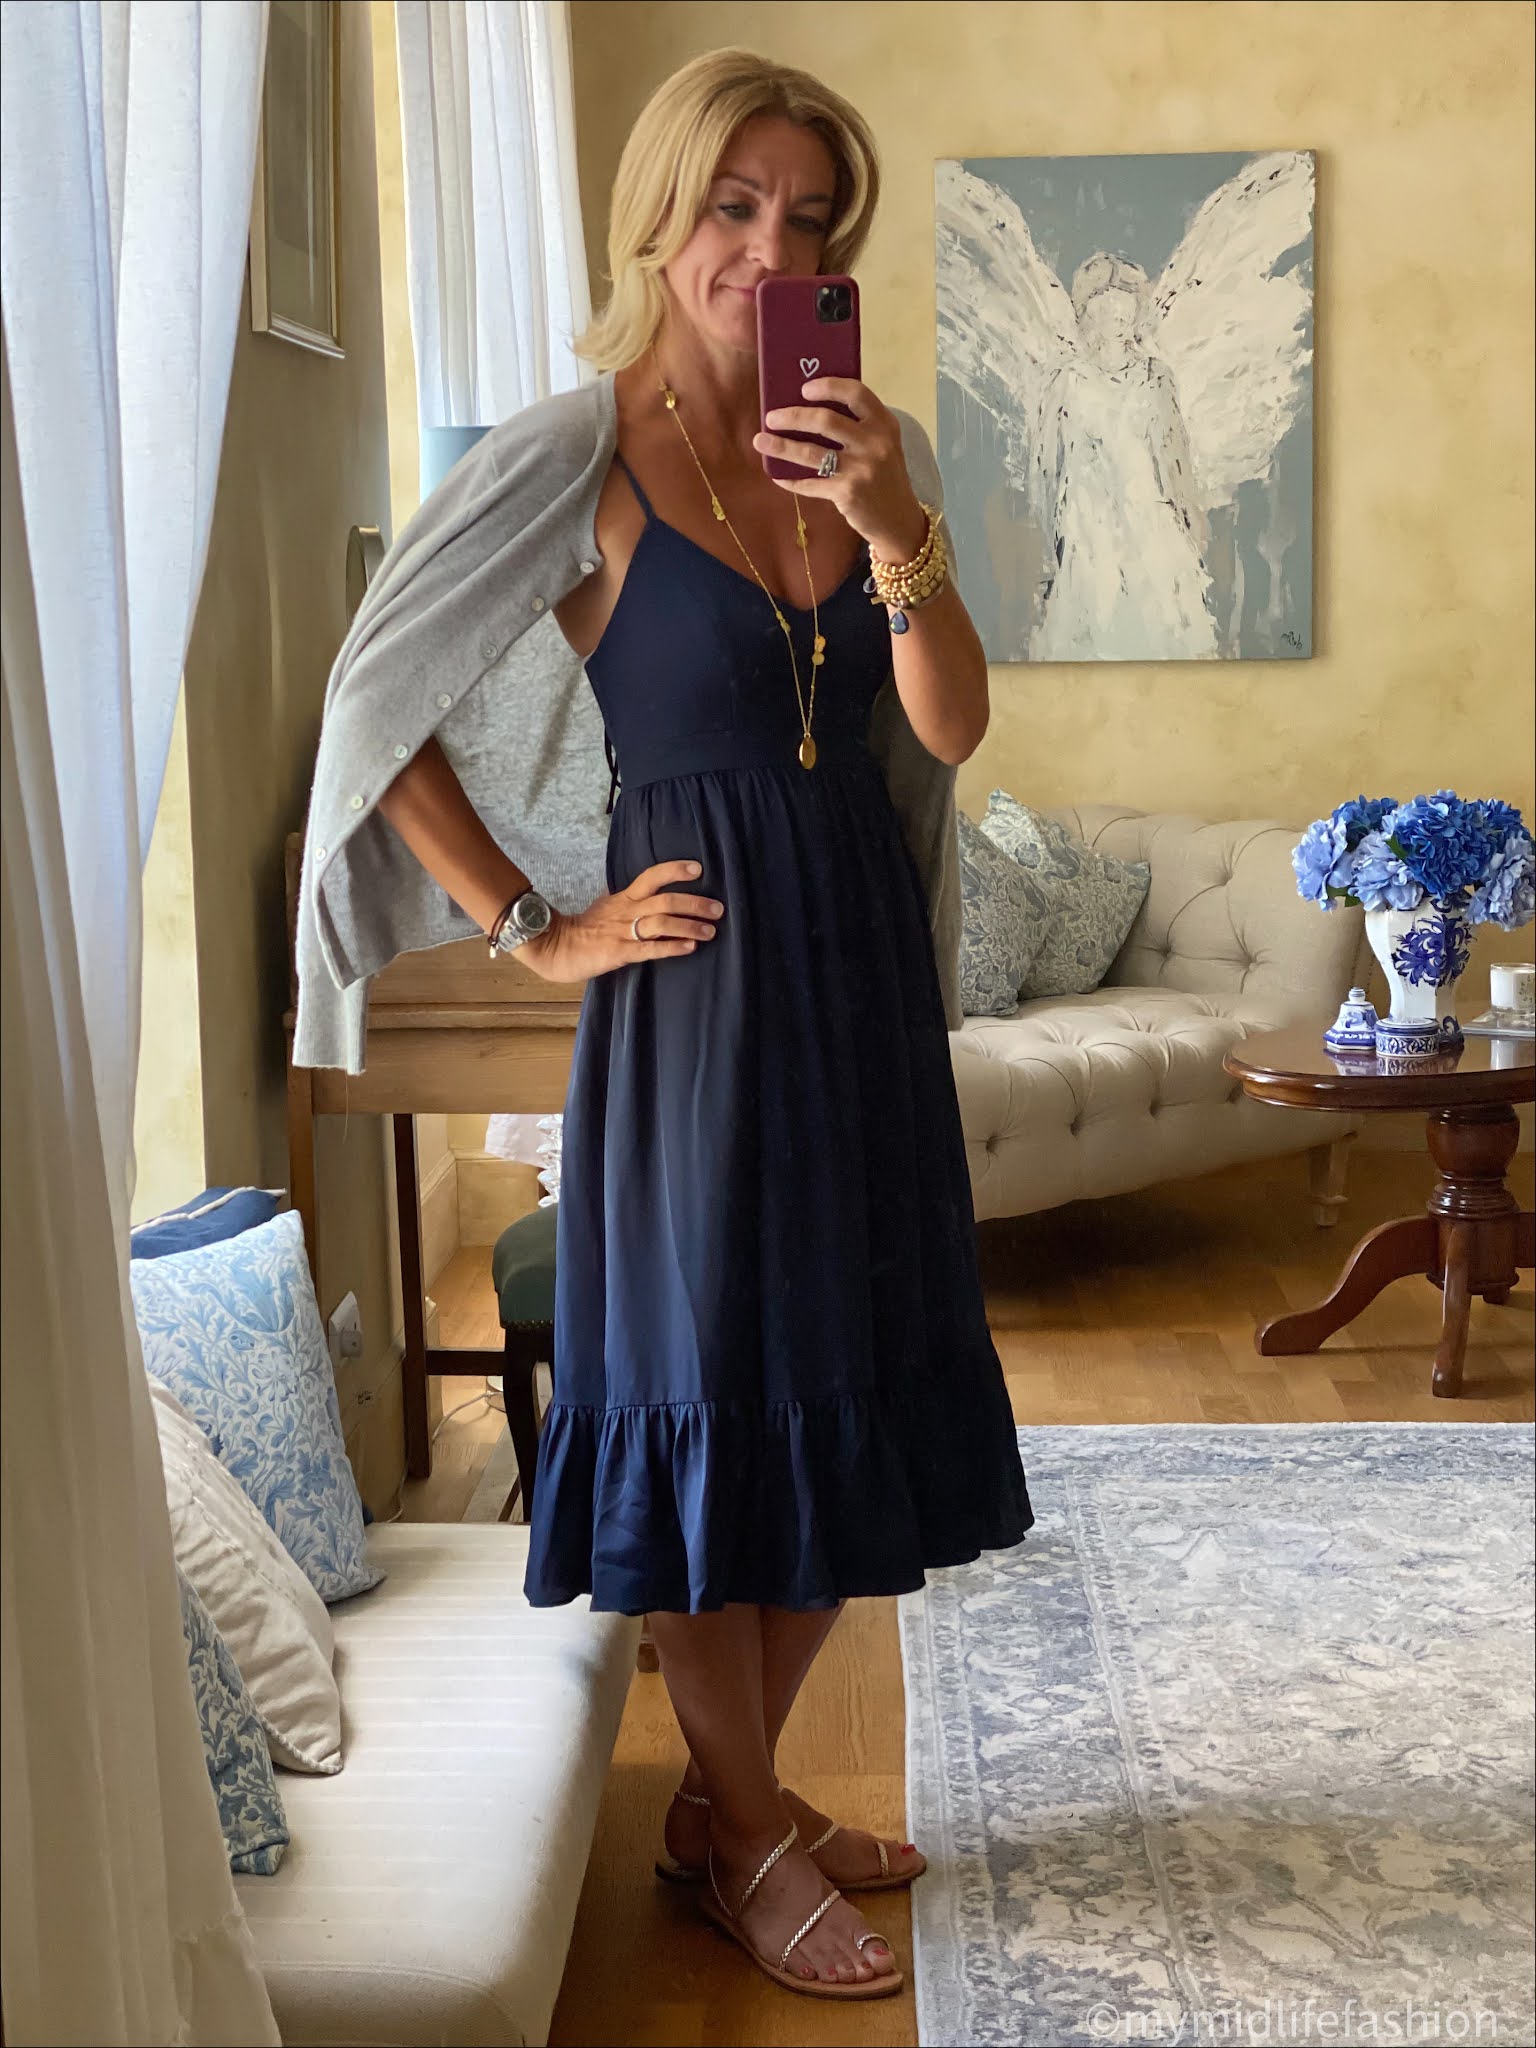 my midlife fashion, marks and Spencer cashmere crew neck cardigan, j crew sundress, speak out Chris braided gold sandals